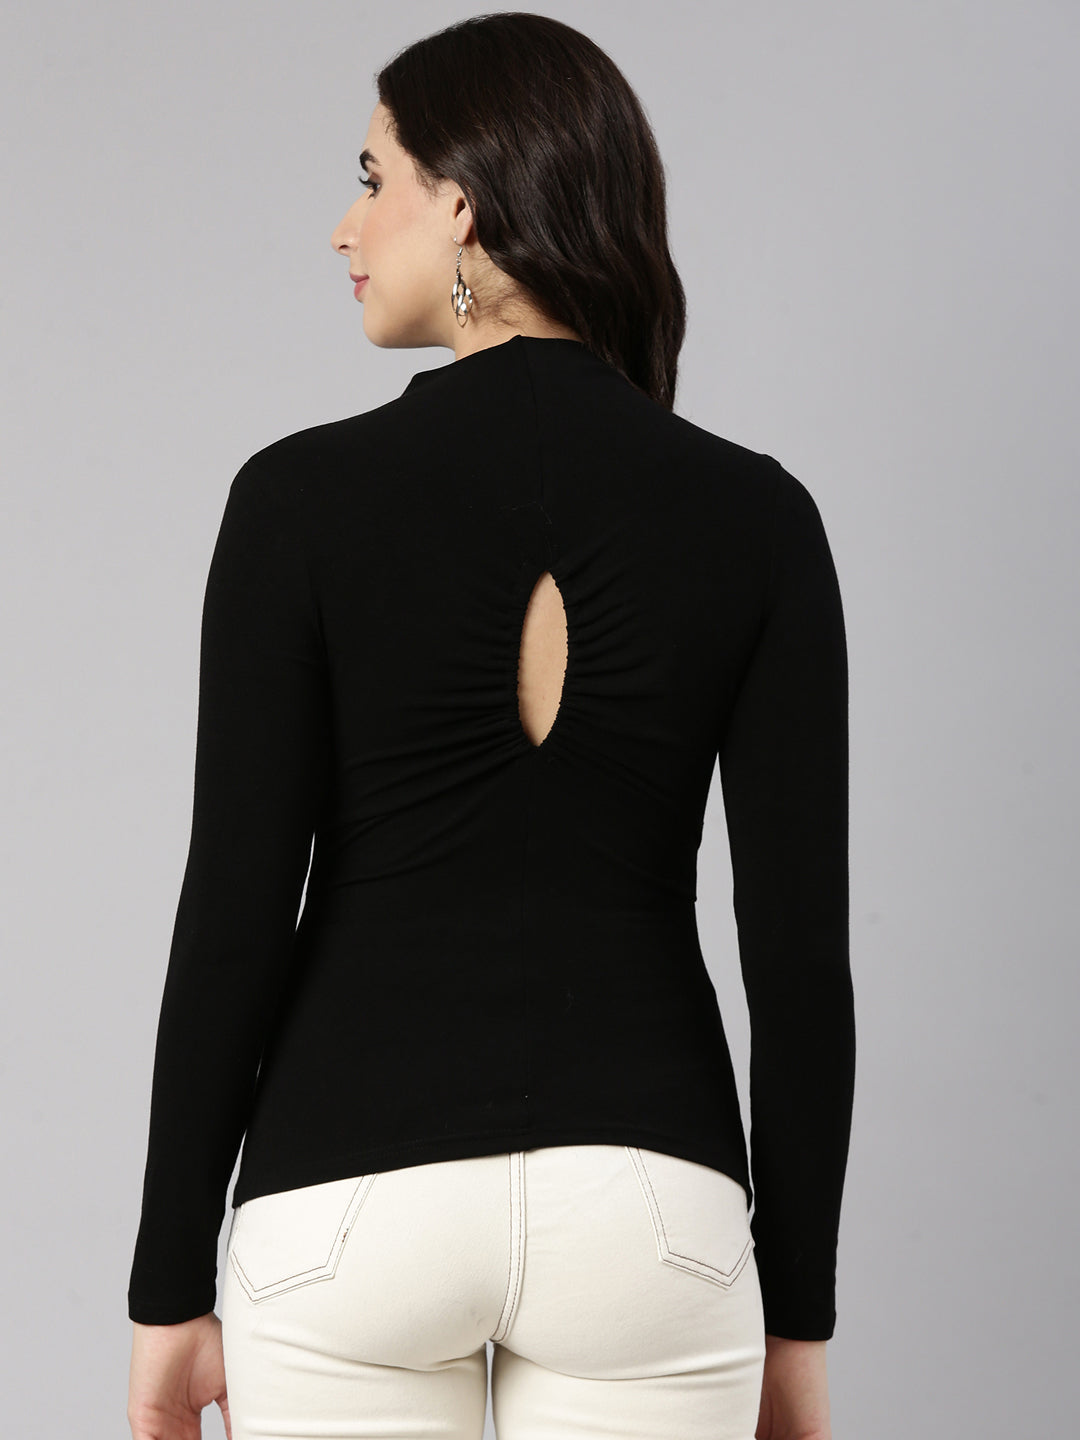 Women Solid Black Styled Back Top